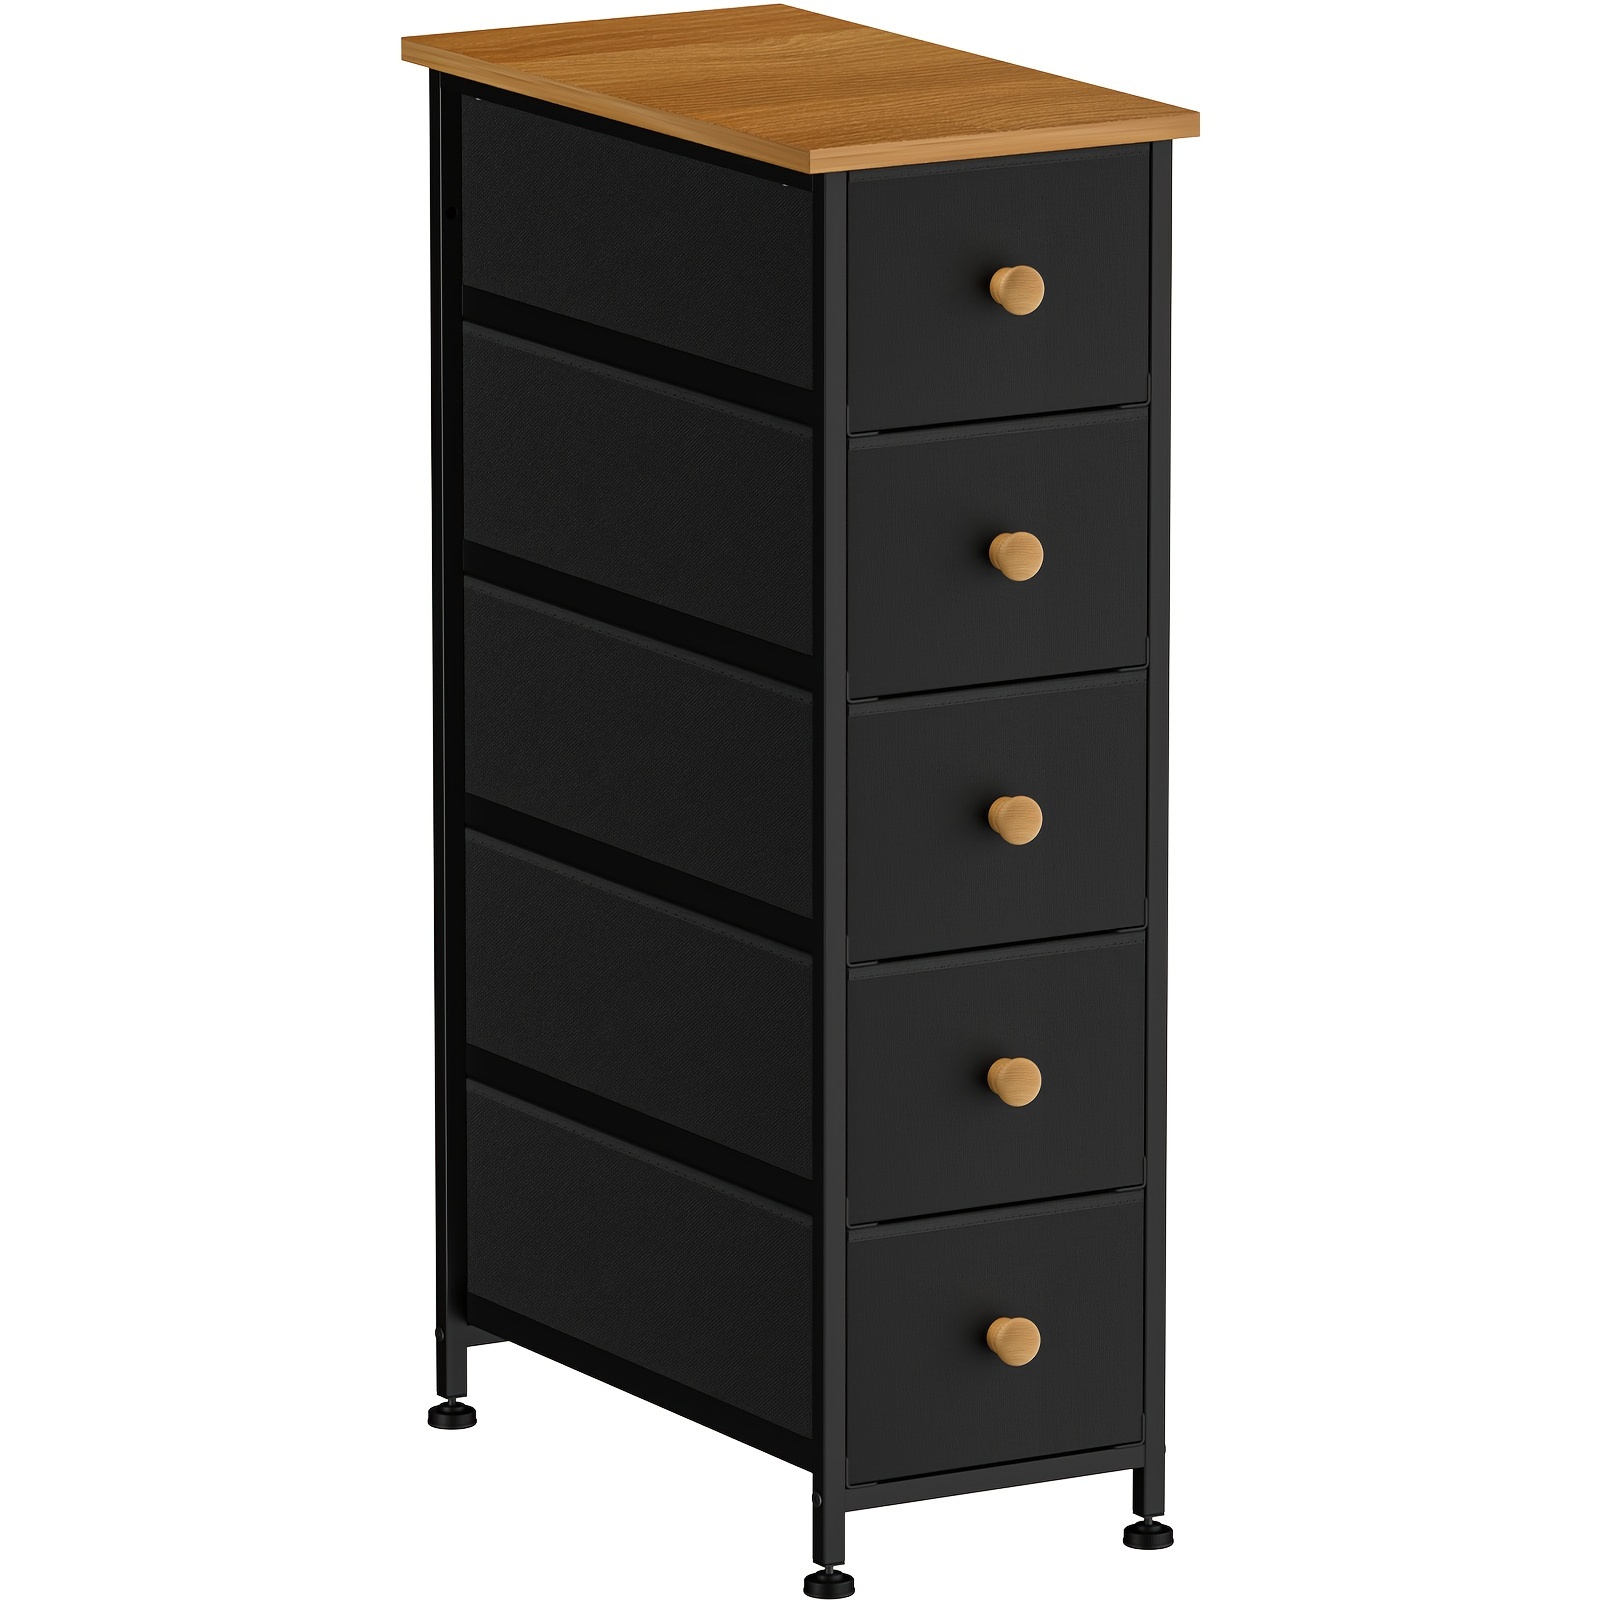 

Narrow Dresser Storage Tower With 5 Drawers, Slim Dresser Chest Of Drawers With Steel Frame, Wood Top, Golden Knobs, White Dresser For Bedroom, Bathroom, Small Spaces, Laundry, Closet